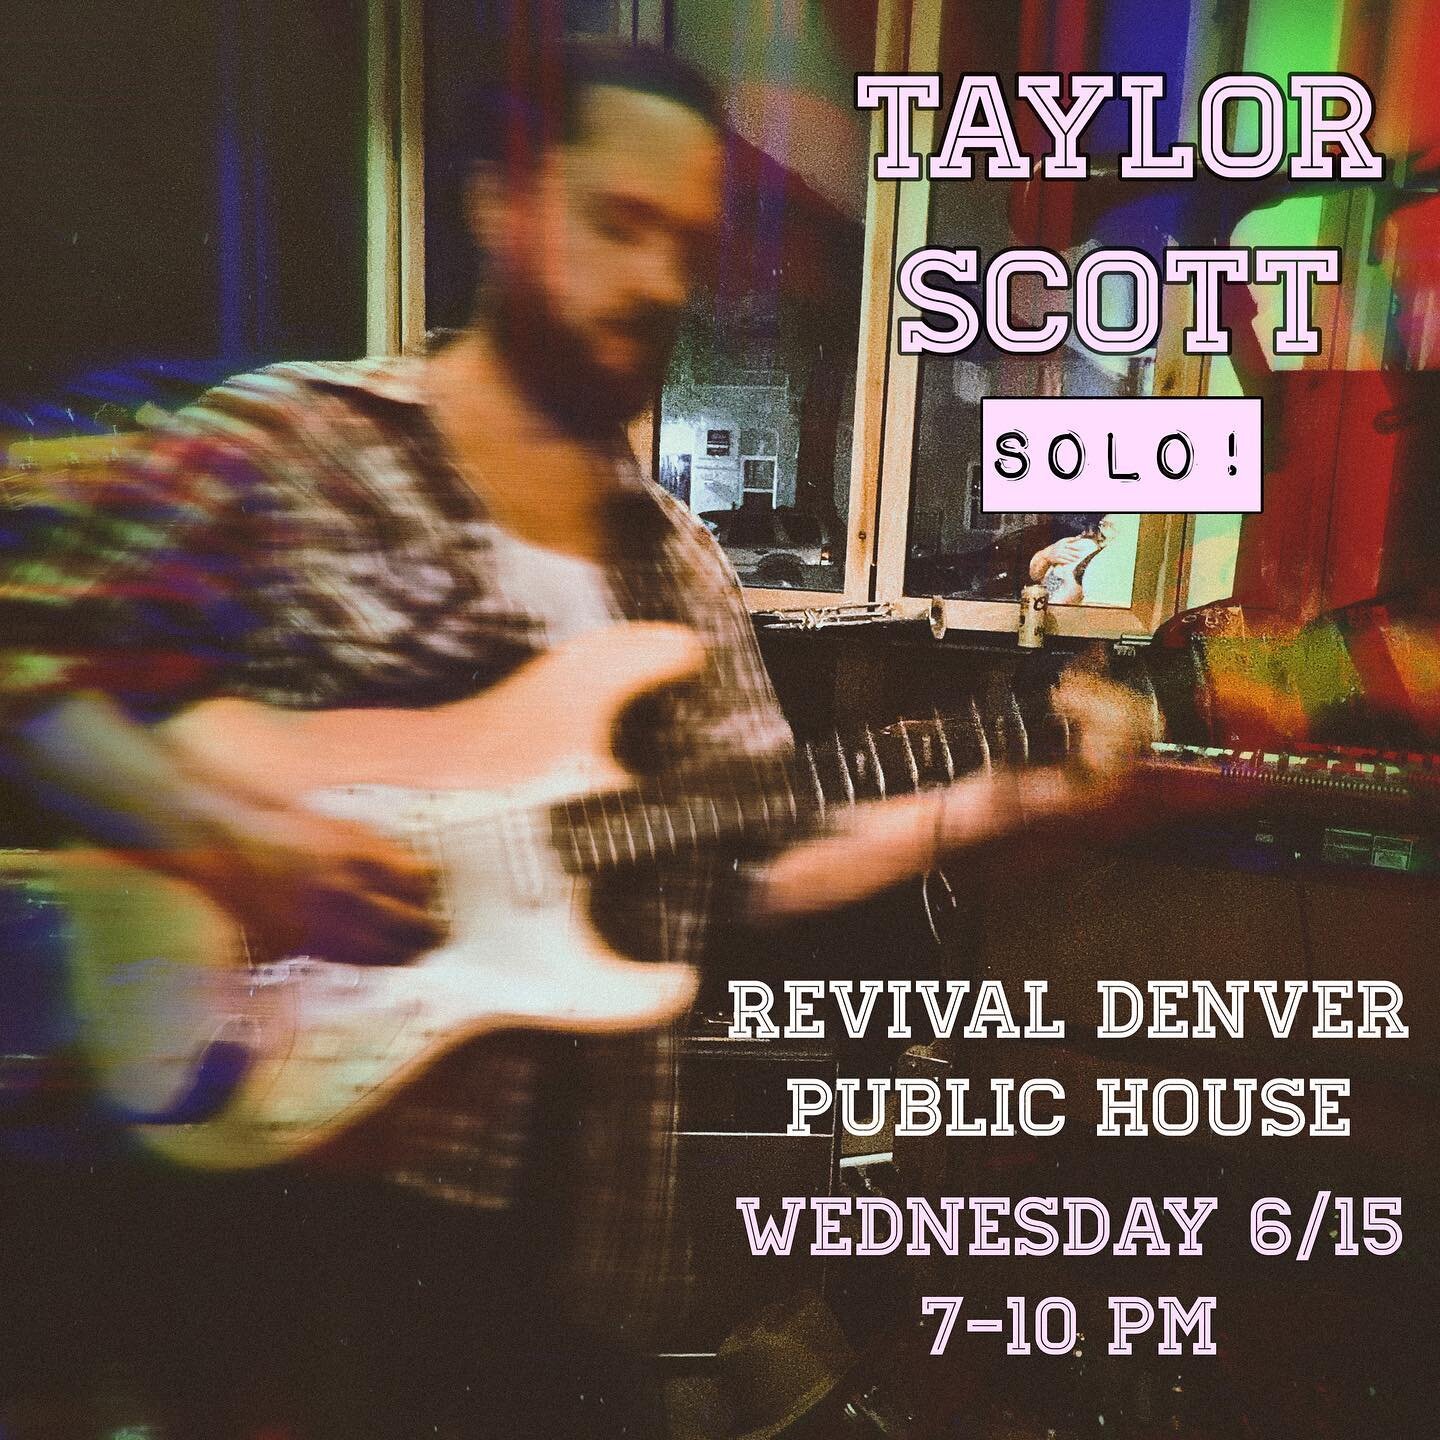 Tonight!  @revival.denver is the jam when it comes to food, booze, atmosphere and vibe. Plus it&rsquo;s owned by two wonderful humans who are cool AF and huge music fans.  Don&rsquo;t sleep on this spot!  Come hang and/or pick some tunes with me 🤓😬